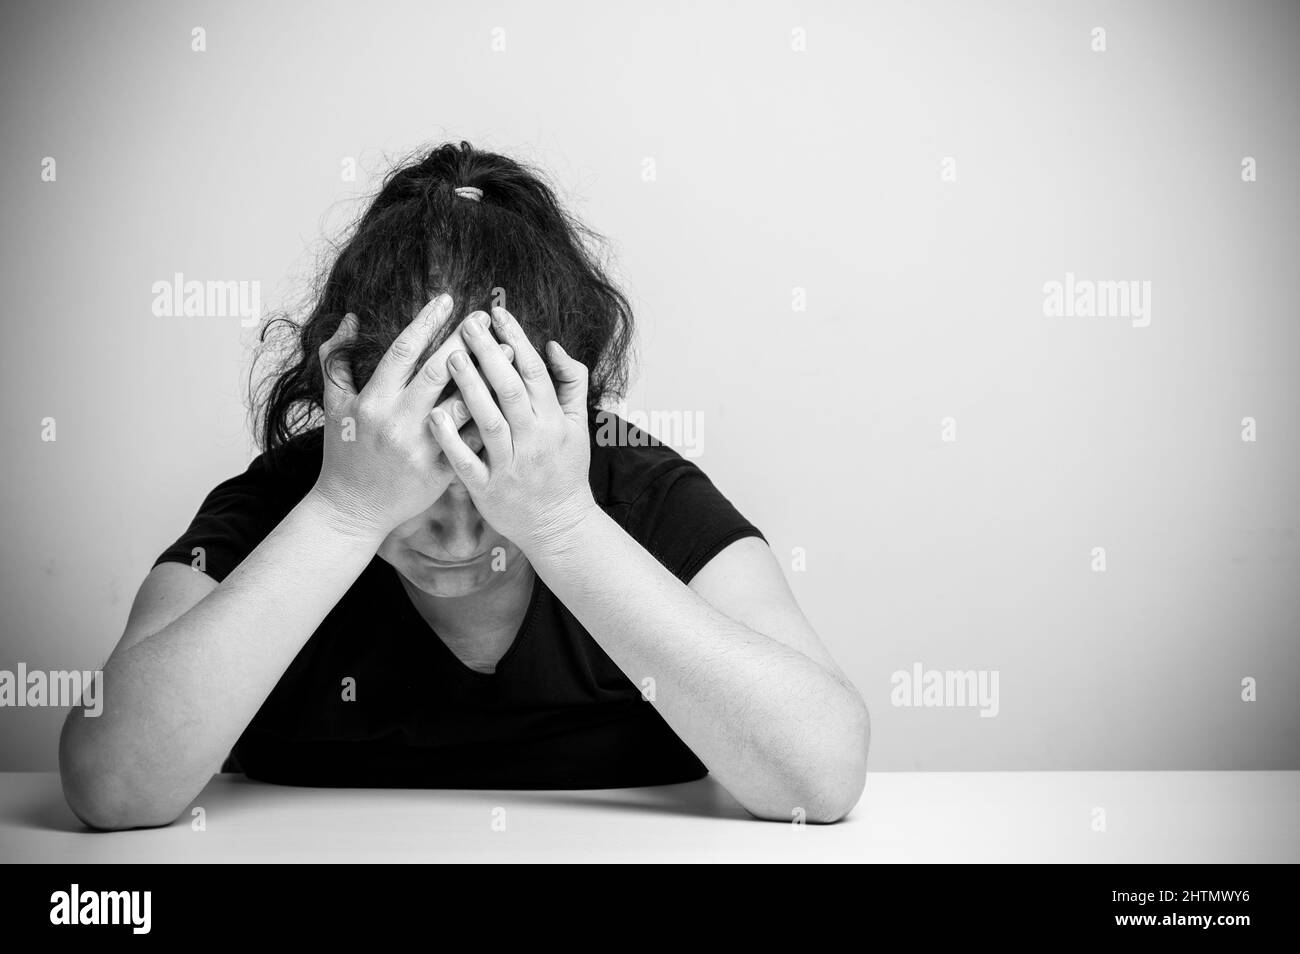 Homeless woman drug and alcohol addict sitting alone and depressed home feeling anxious and lonely, social documentary concept black and white Stock Photo